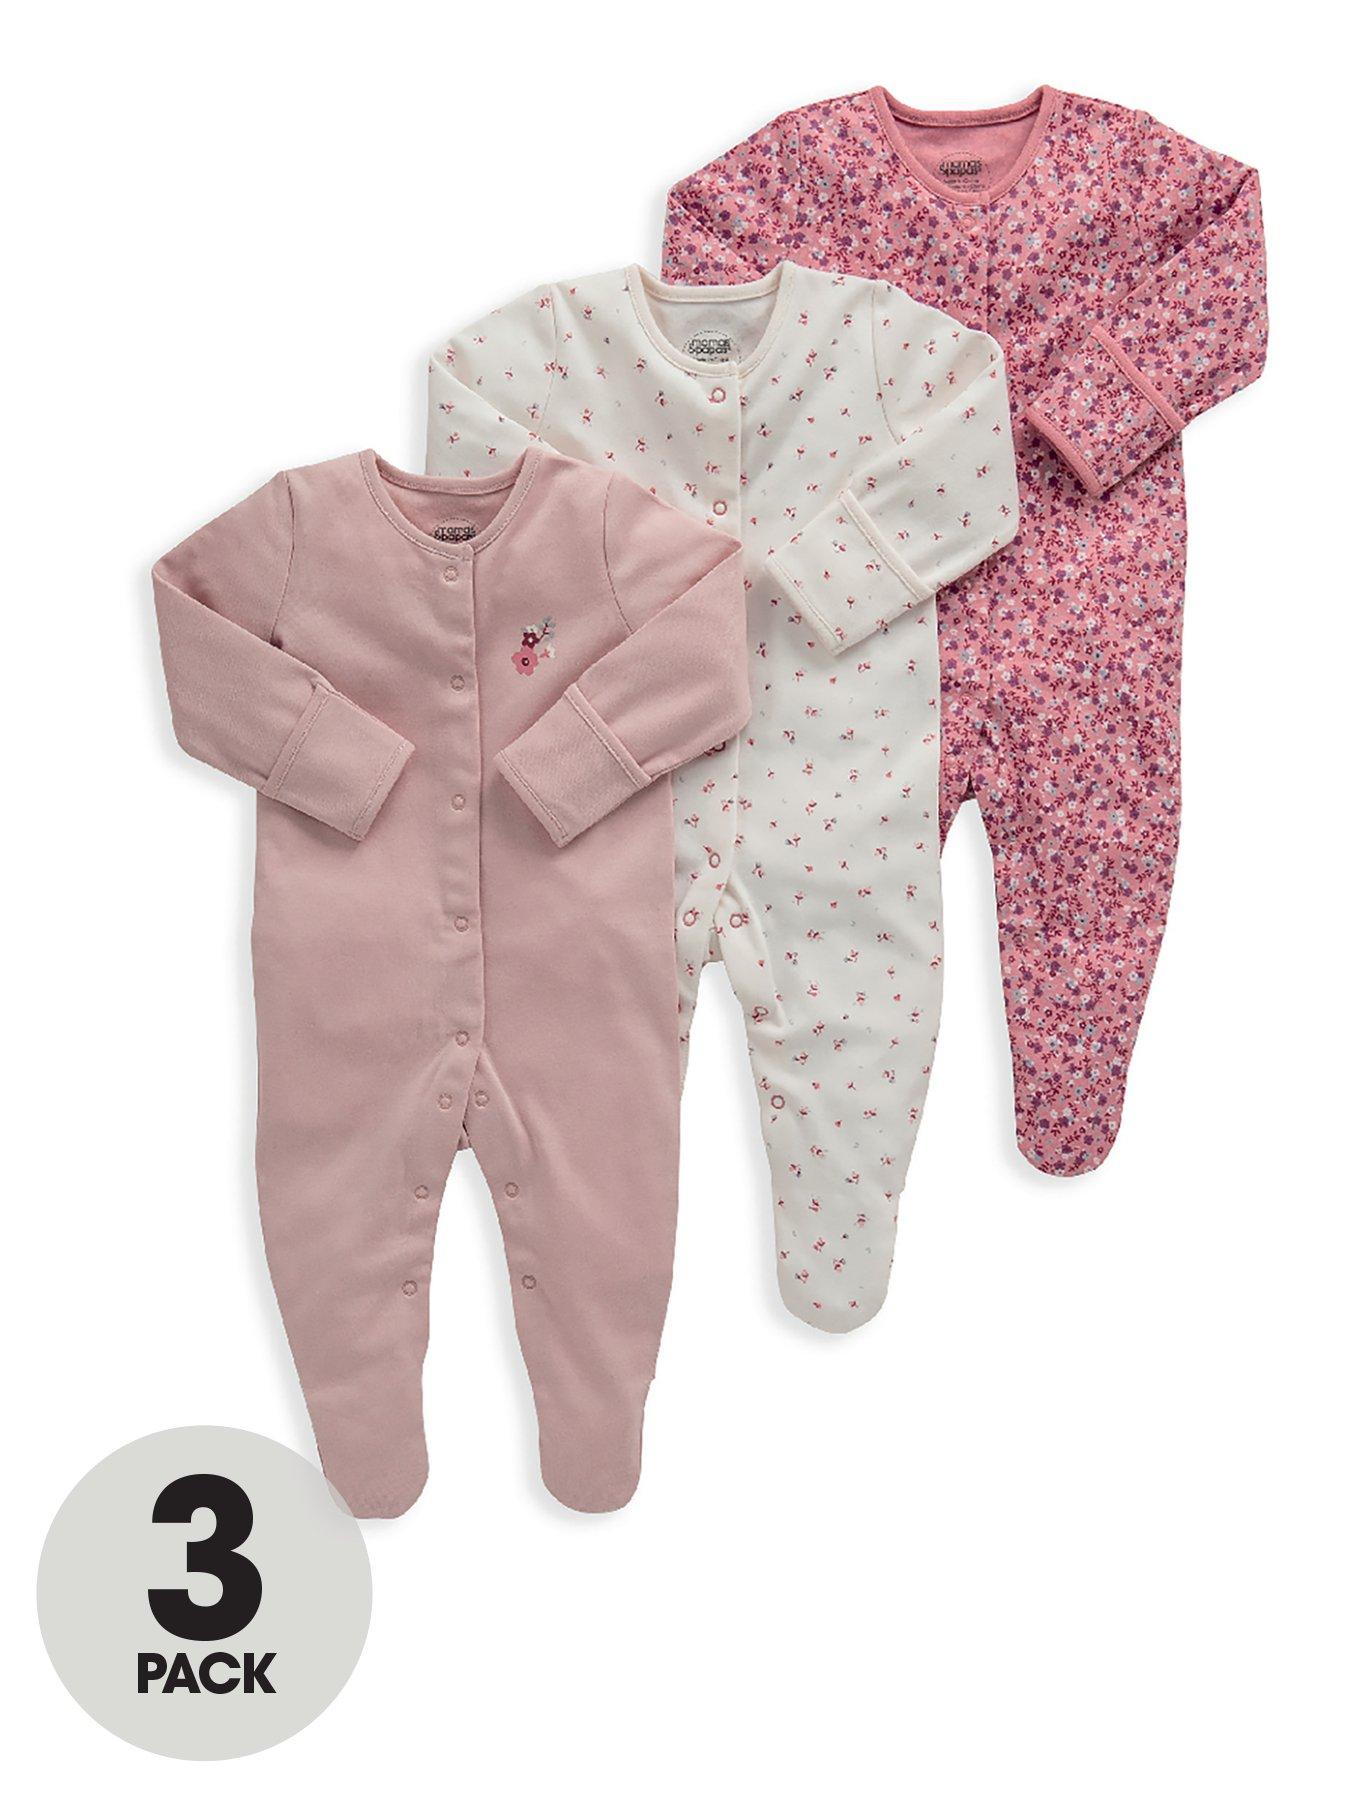 Baby Clothes Baby Girls 3 Pack Ditsy Floral Sleepsuits - Multi